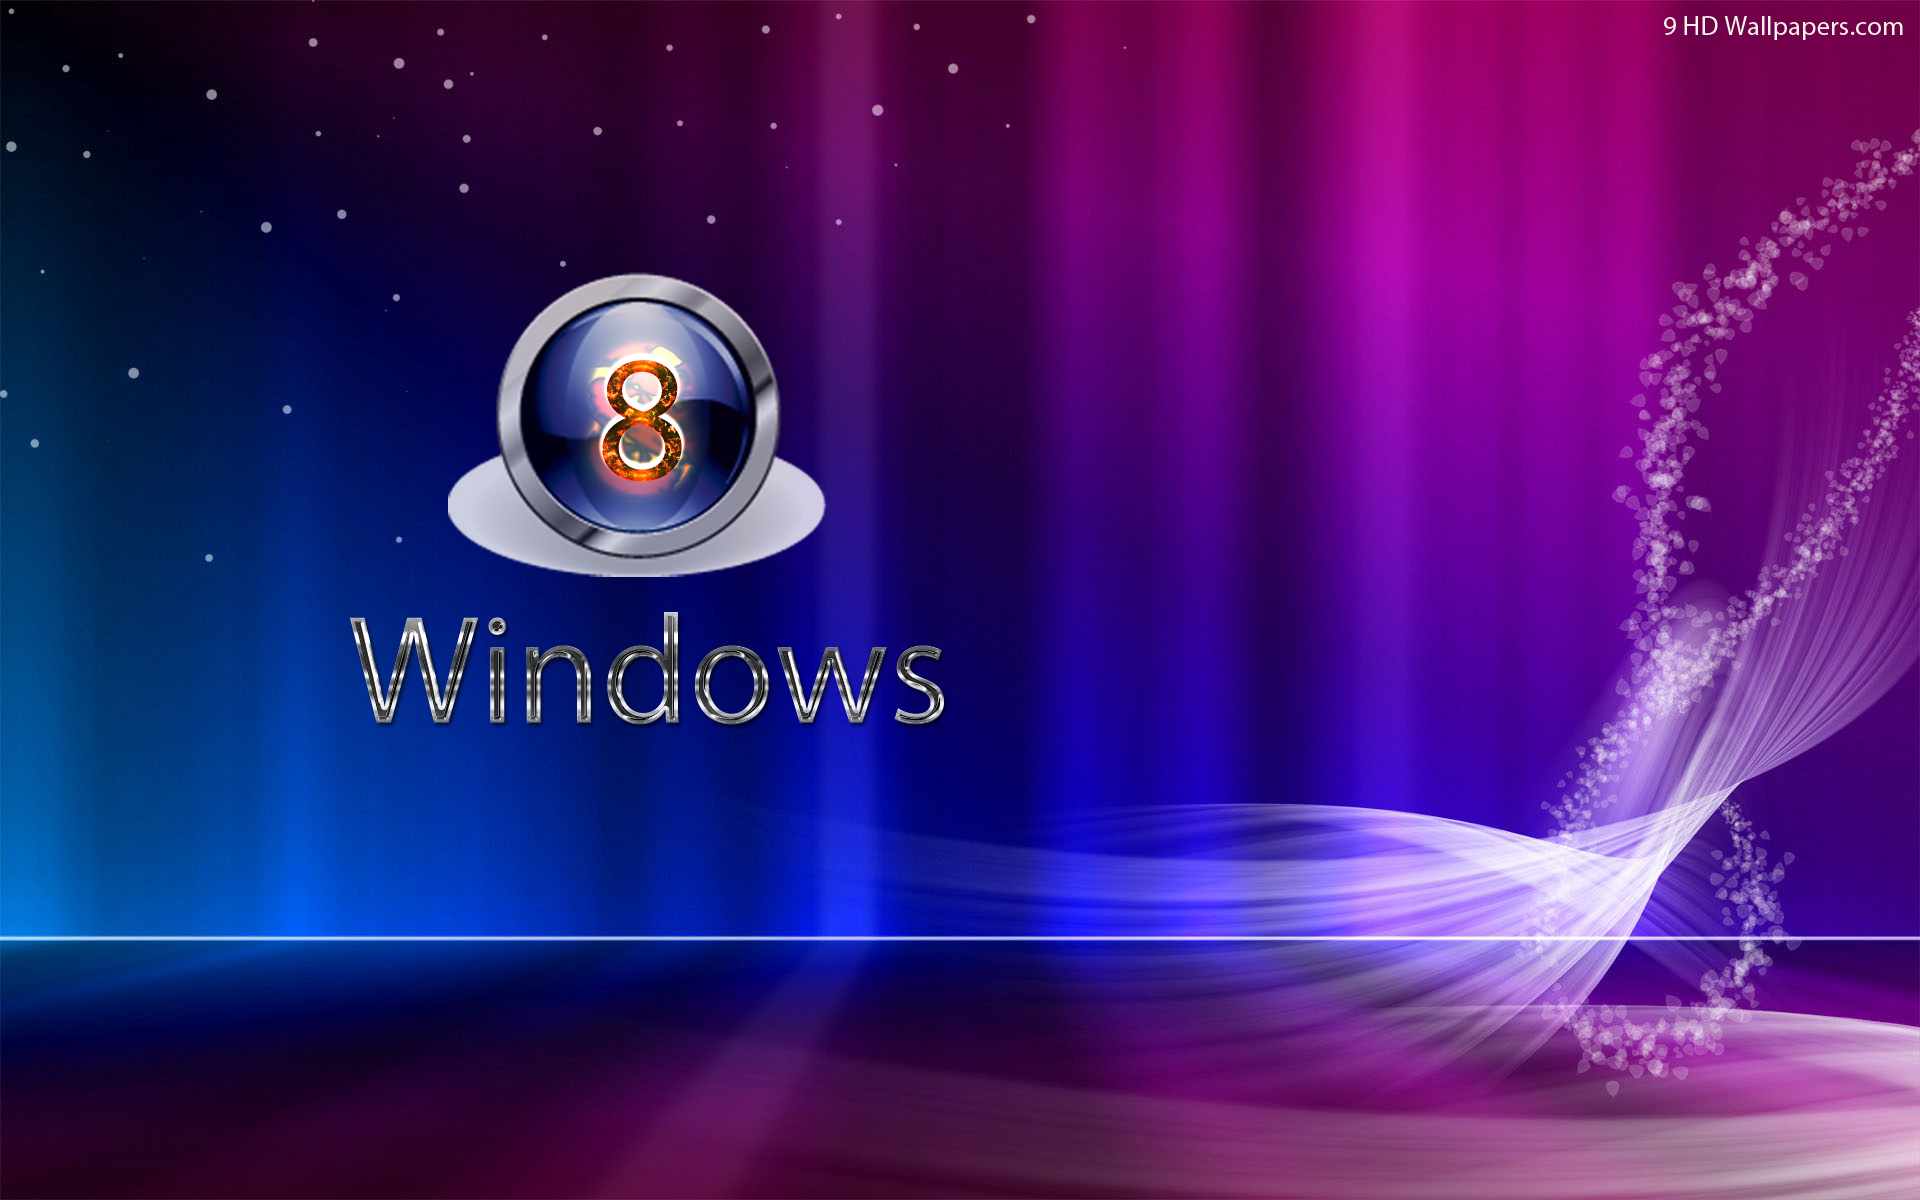 Free Windows Backgrounds Wallpapers - Wallpaper Cave